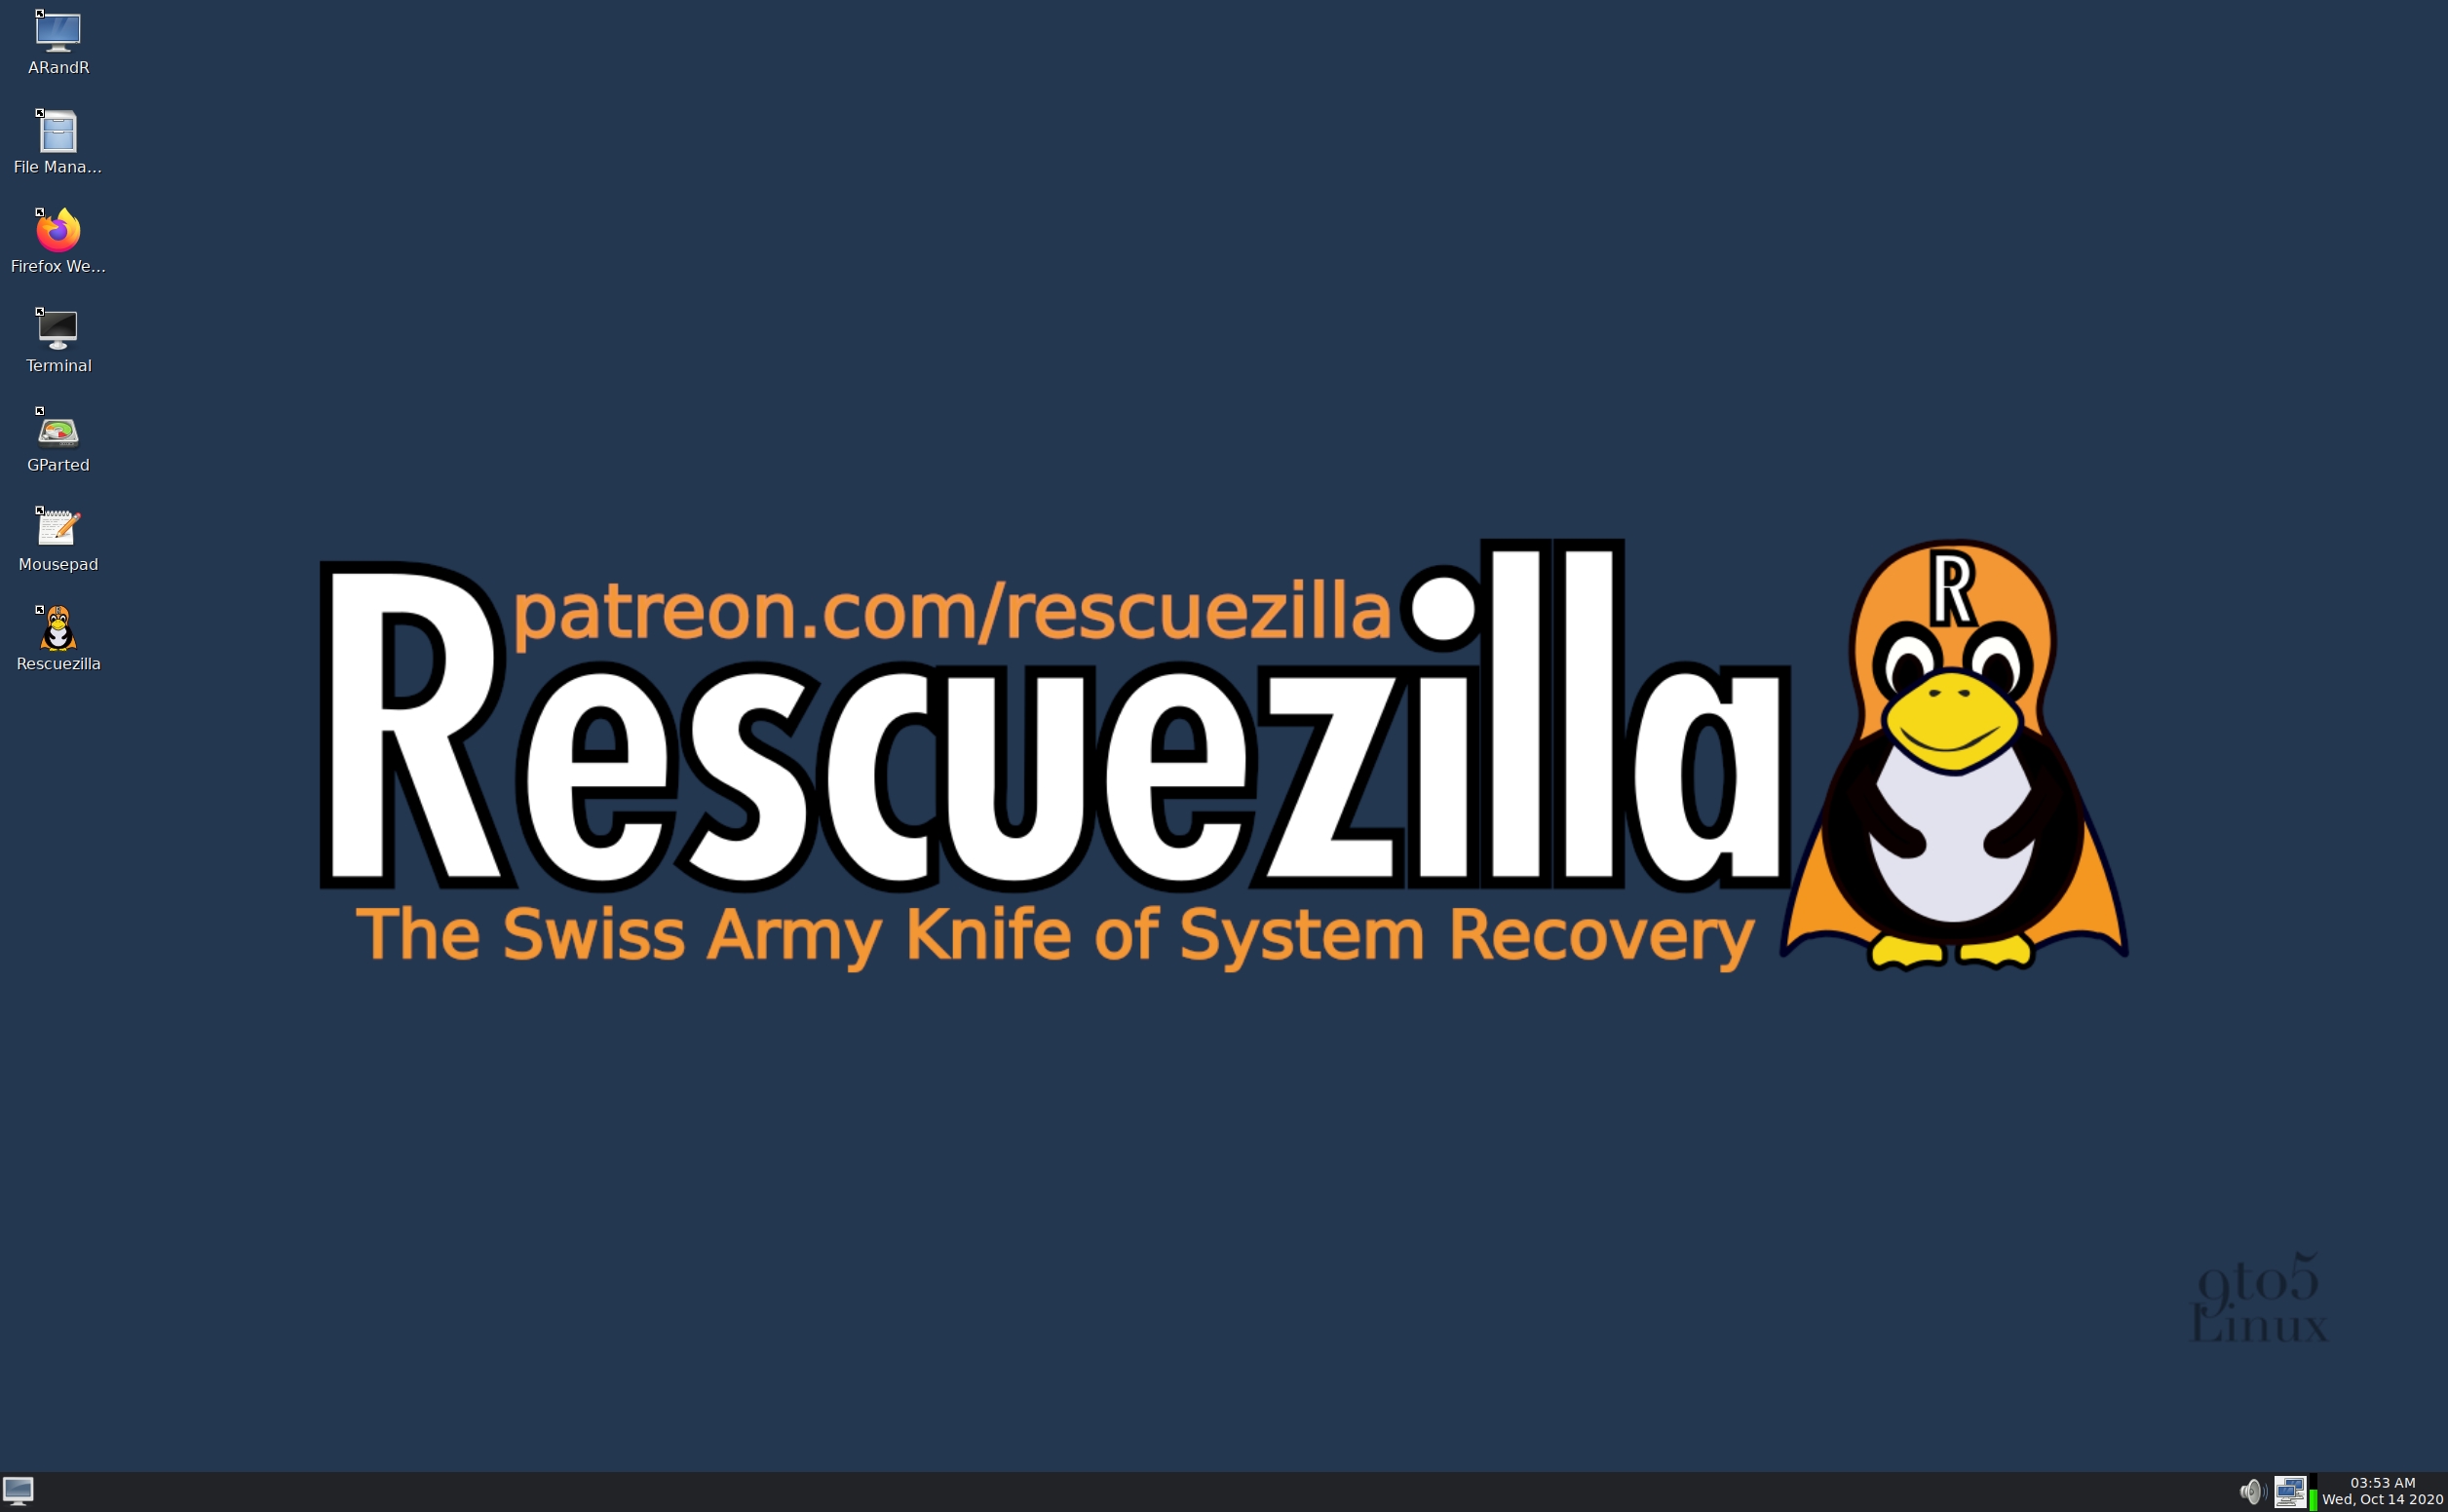 Rescuezilla 2.0, the Swiss Army Knife of System Recovery, Released with Major Changes